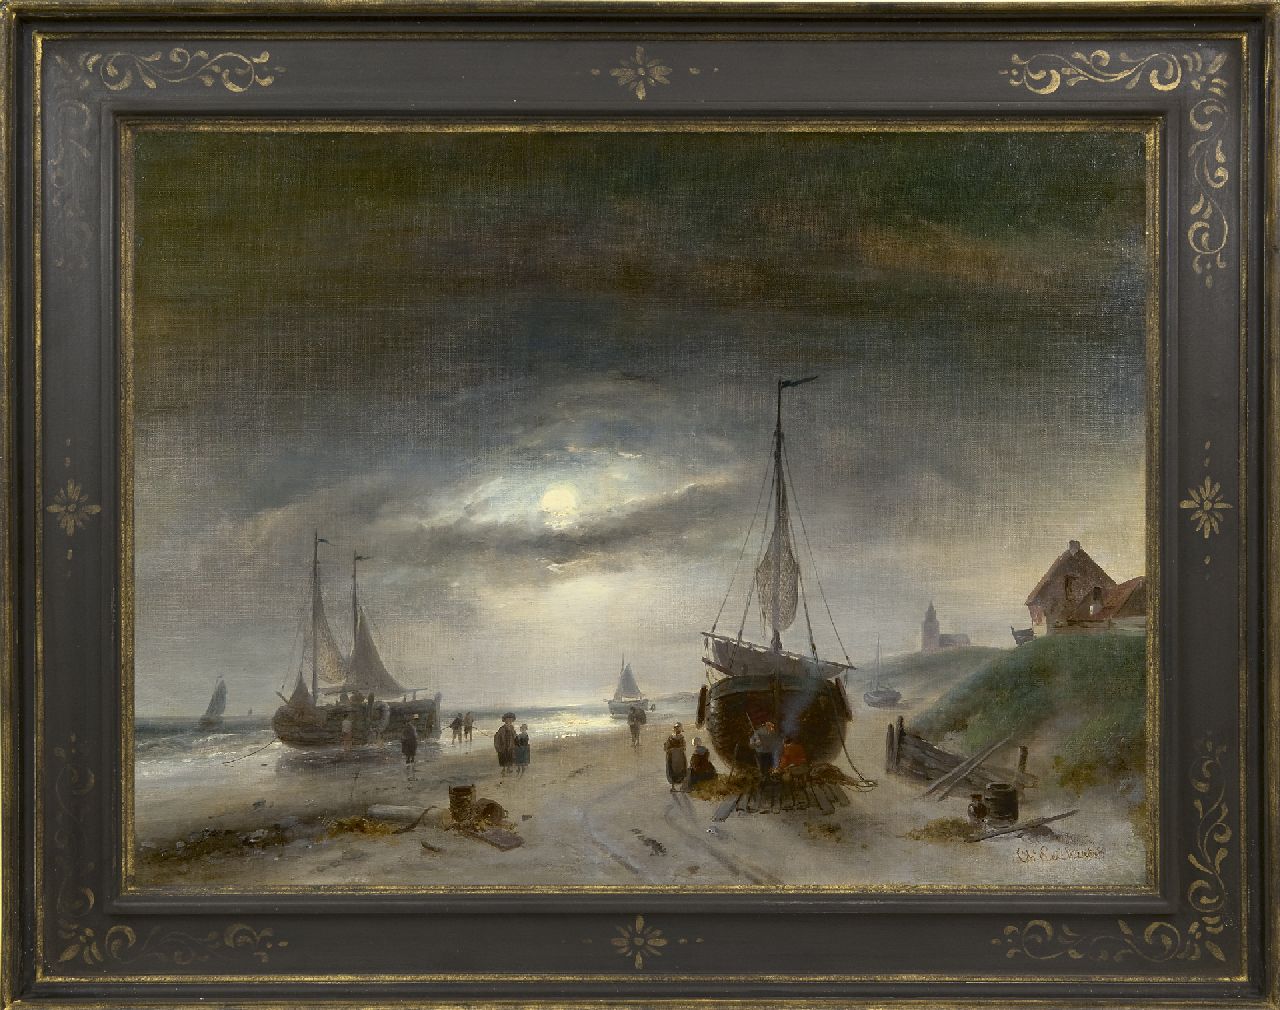 Leickert C.H.J.  | 'Charles' Henri Joseph Leickert | Paintings offered for sale | Barges on the beach of Scheveningen, by moonlight, oil on canvas 48.6 x 65.6 cm, signed l.r.